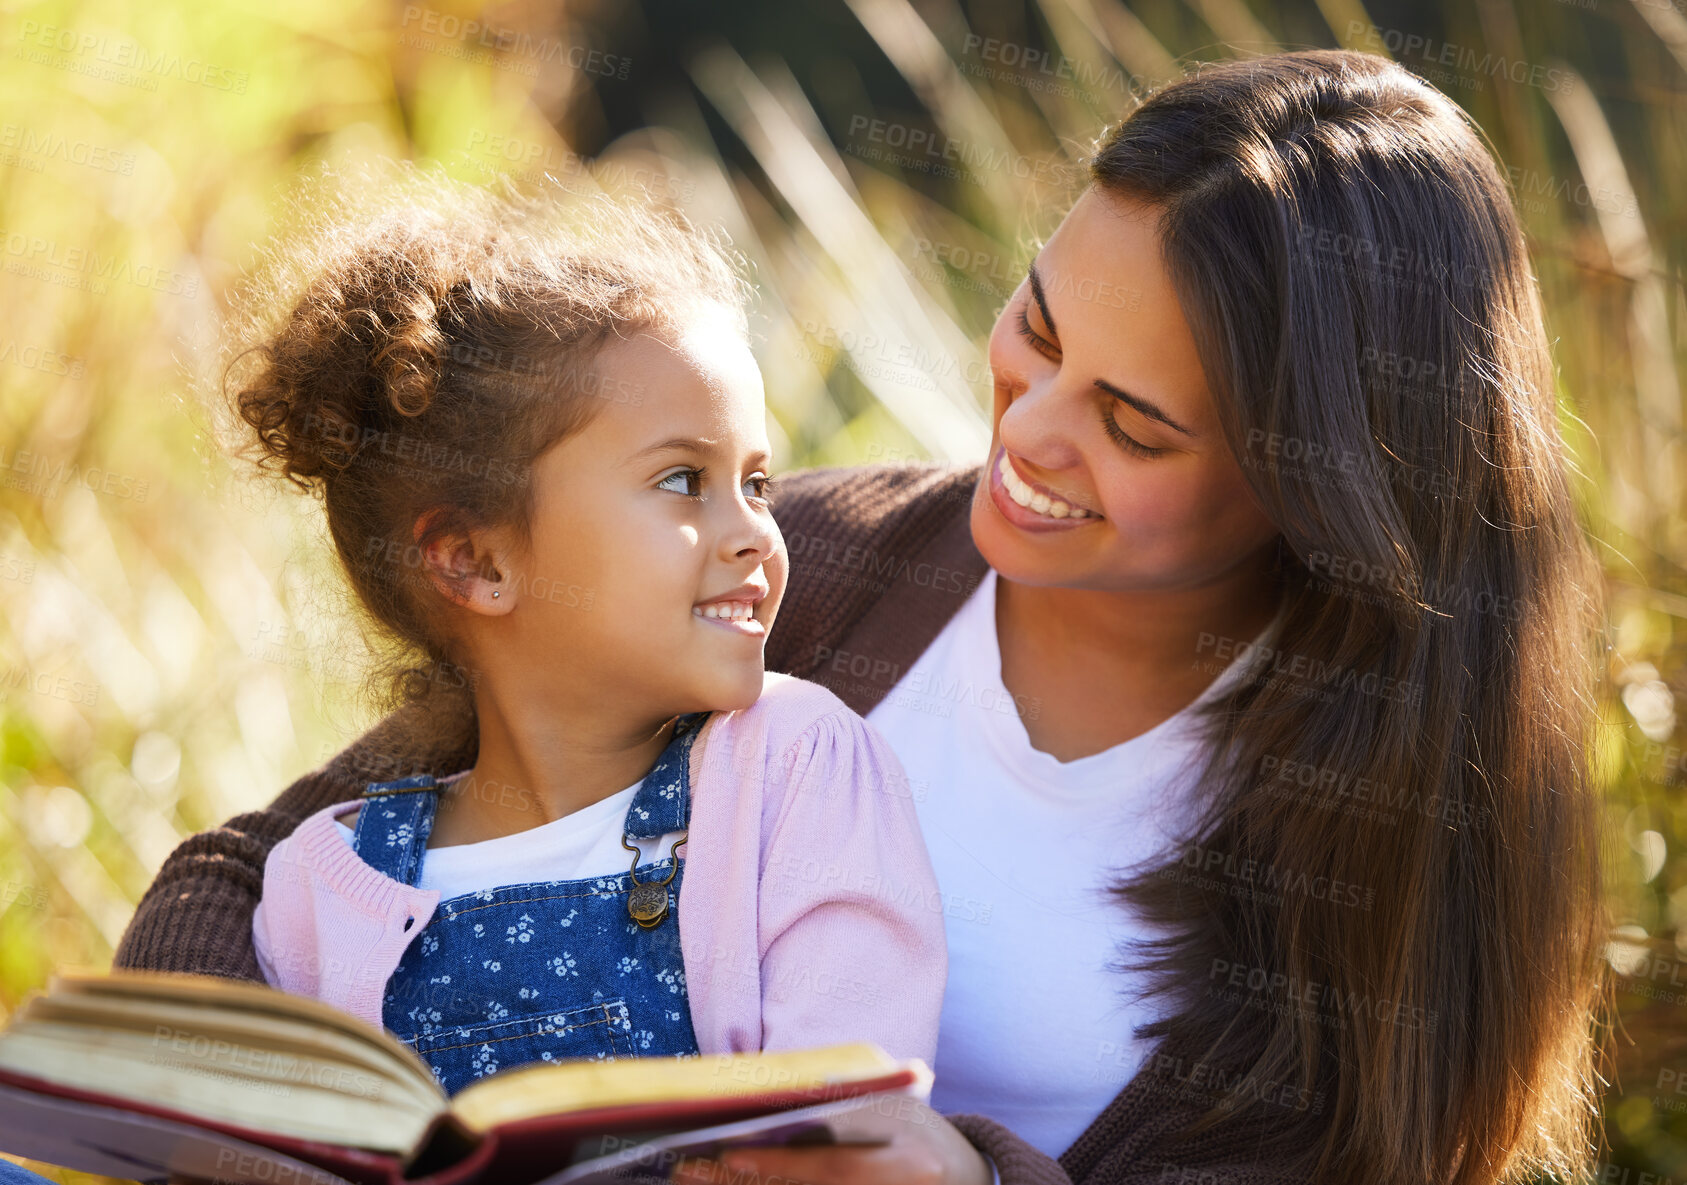 Buy stock photo Cropped shot of an attractive young woman reading to her daughter while picnicking in the park